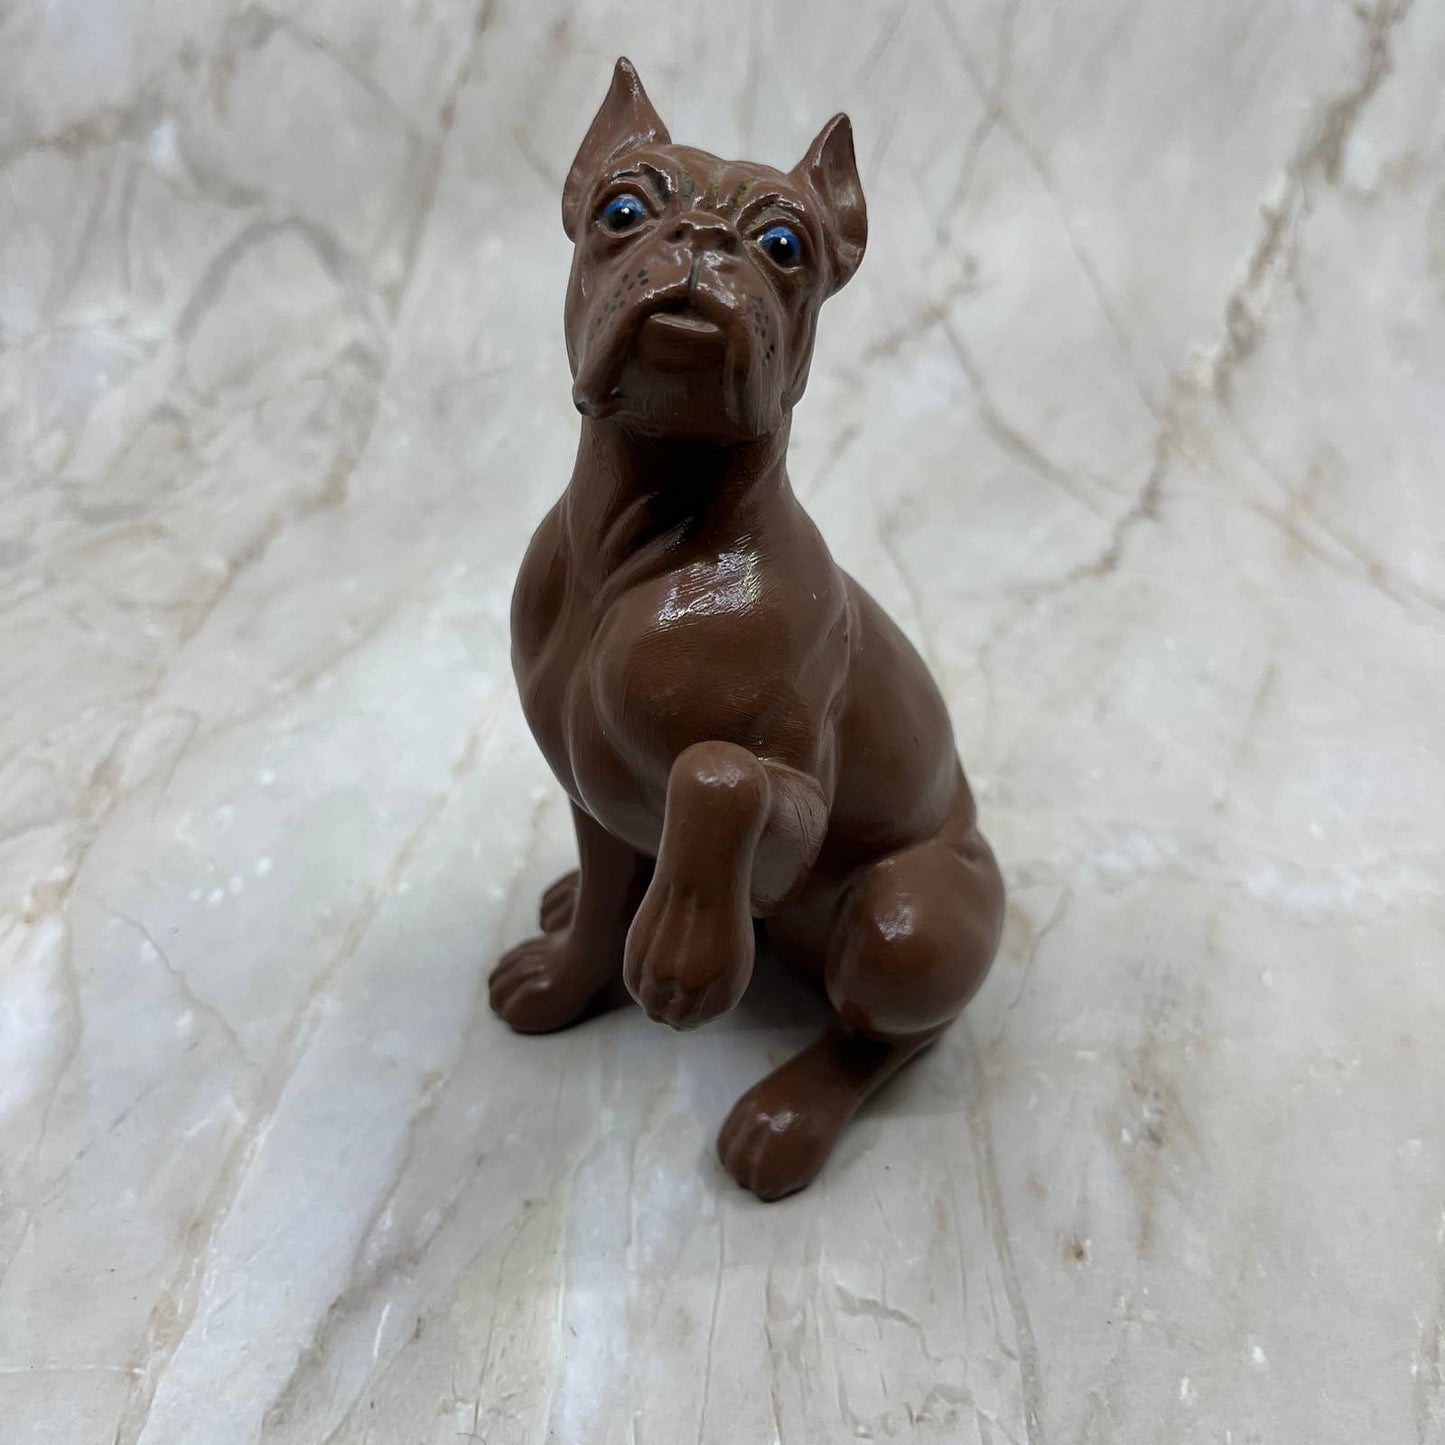 MCM Ceramic Dog Boxer Figurine Atlantic Mold Co 6” Paw Up Hand Painted Brown TI7